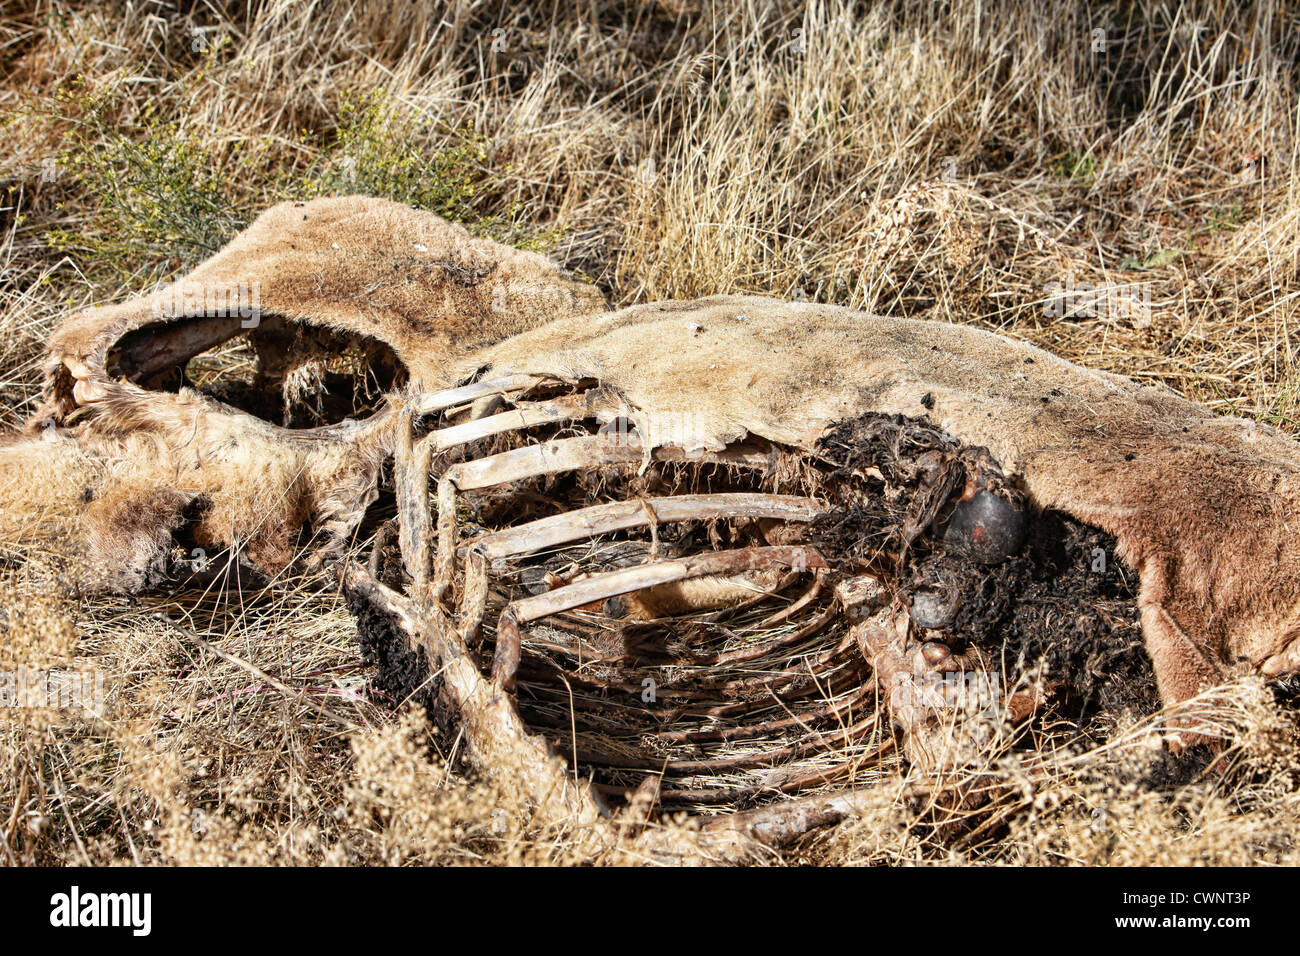 A dead deers carcass lying on a rocky, grassy hill as it decomposes, decays. Stock Photo